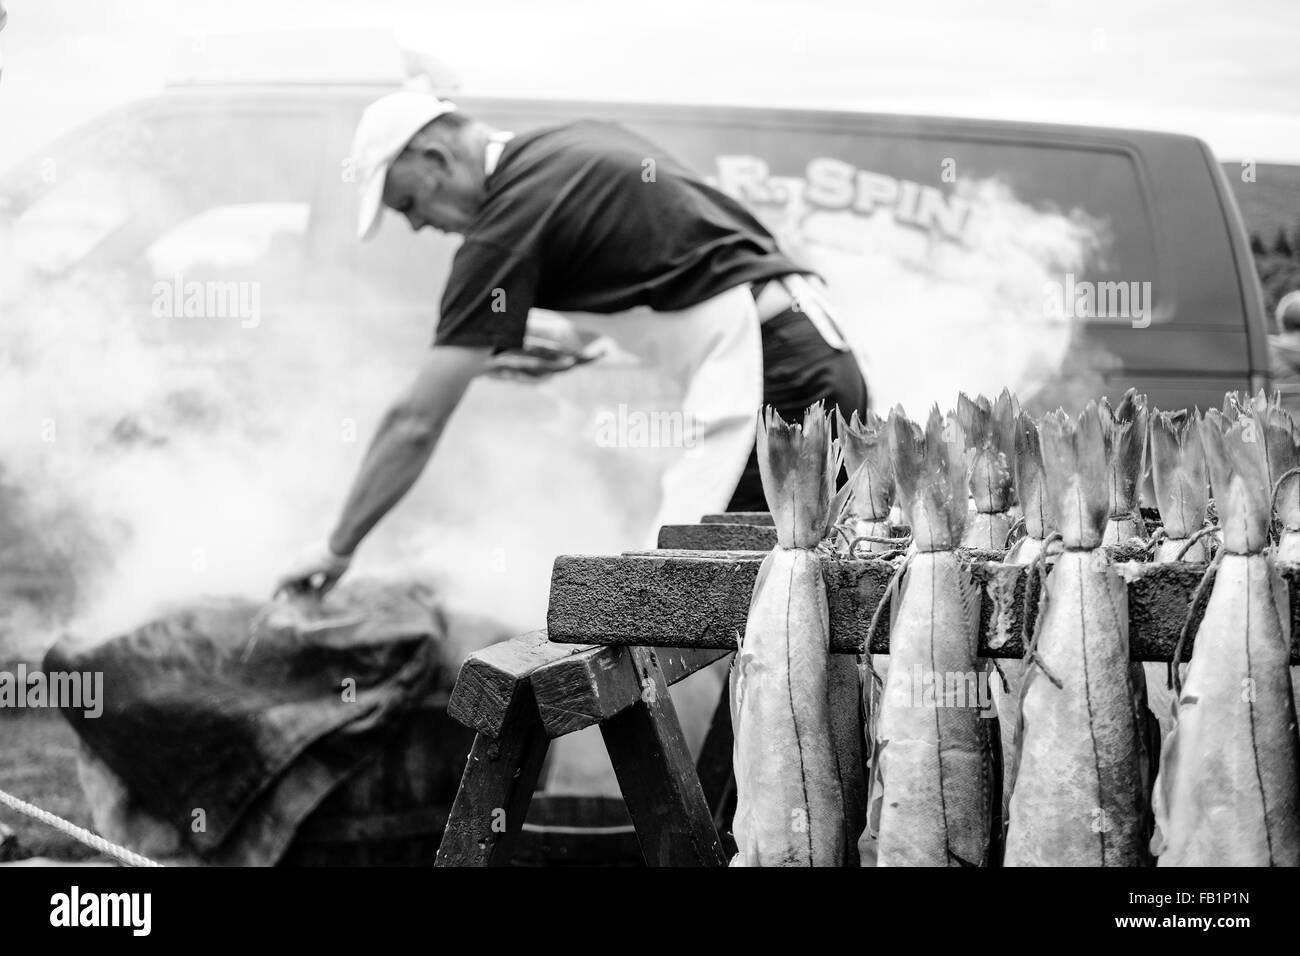 Ian R. Spink cooking Arbroath Smokies at the Moy Highland Games in Scotland. Stock Photo